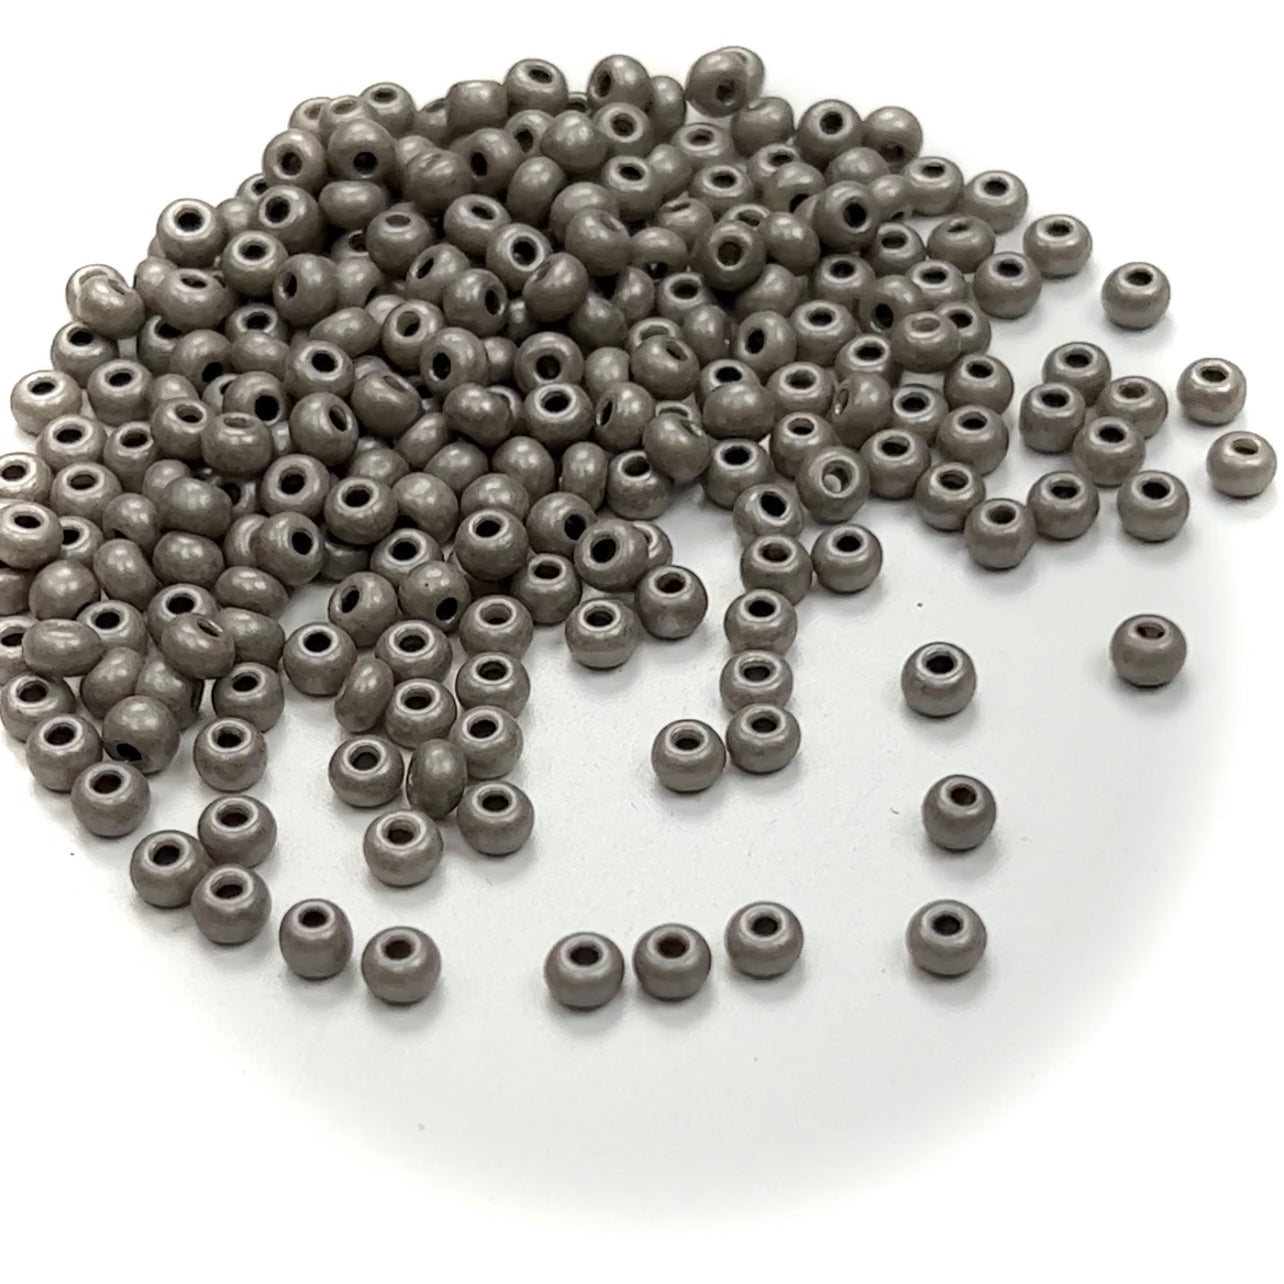 Rocailles size 6/0 (4mm) Grey Dyed Pearl, Preciosa Ornela Traditional Czech Glass Seed Beads, 30grams (1 oz), P961